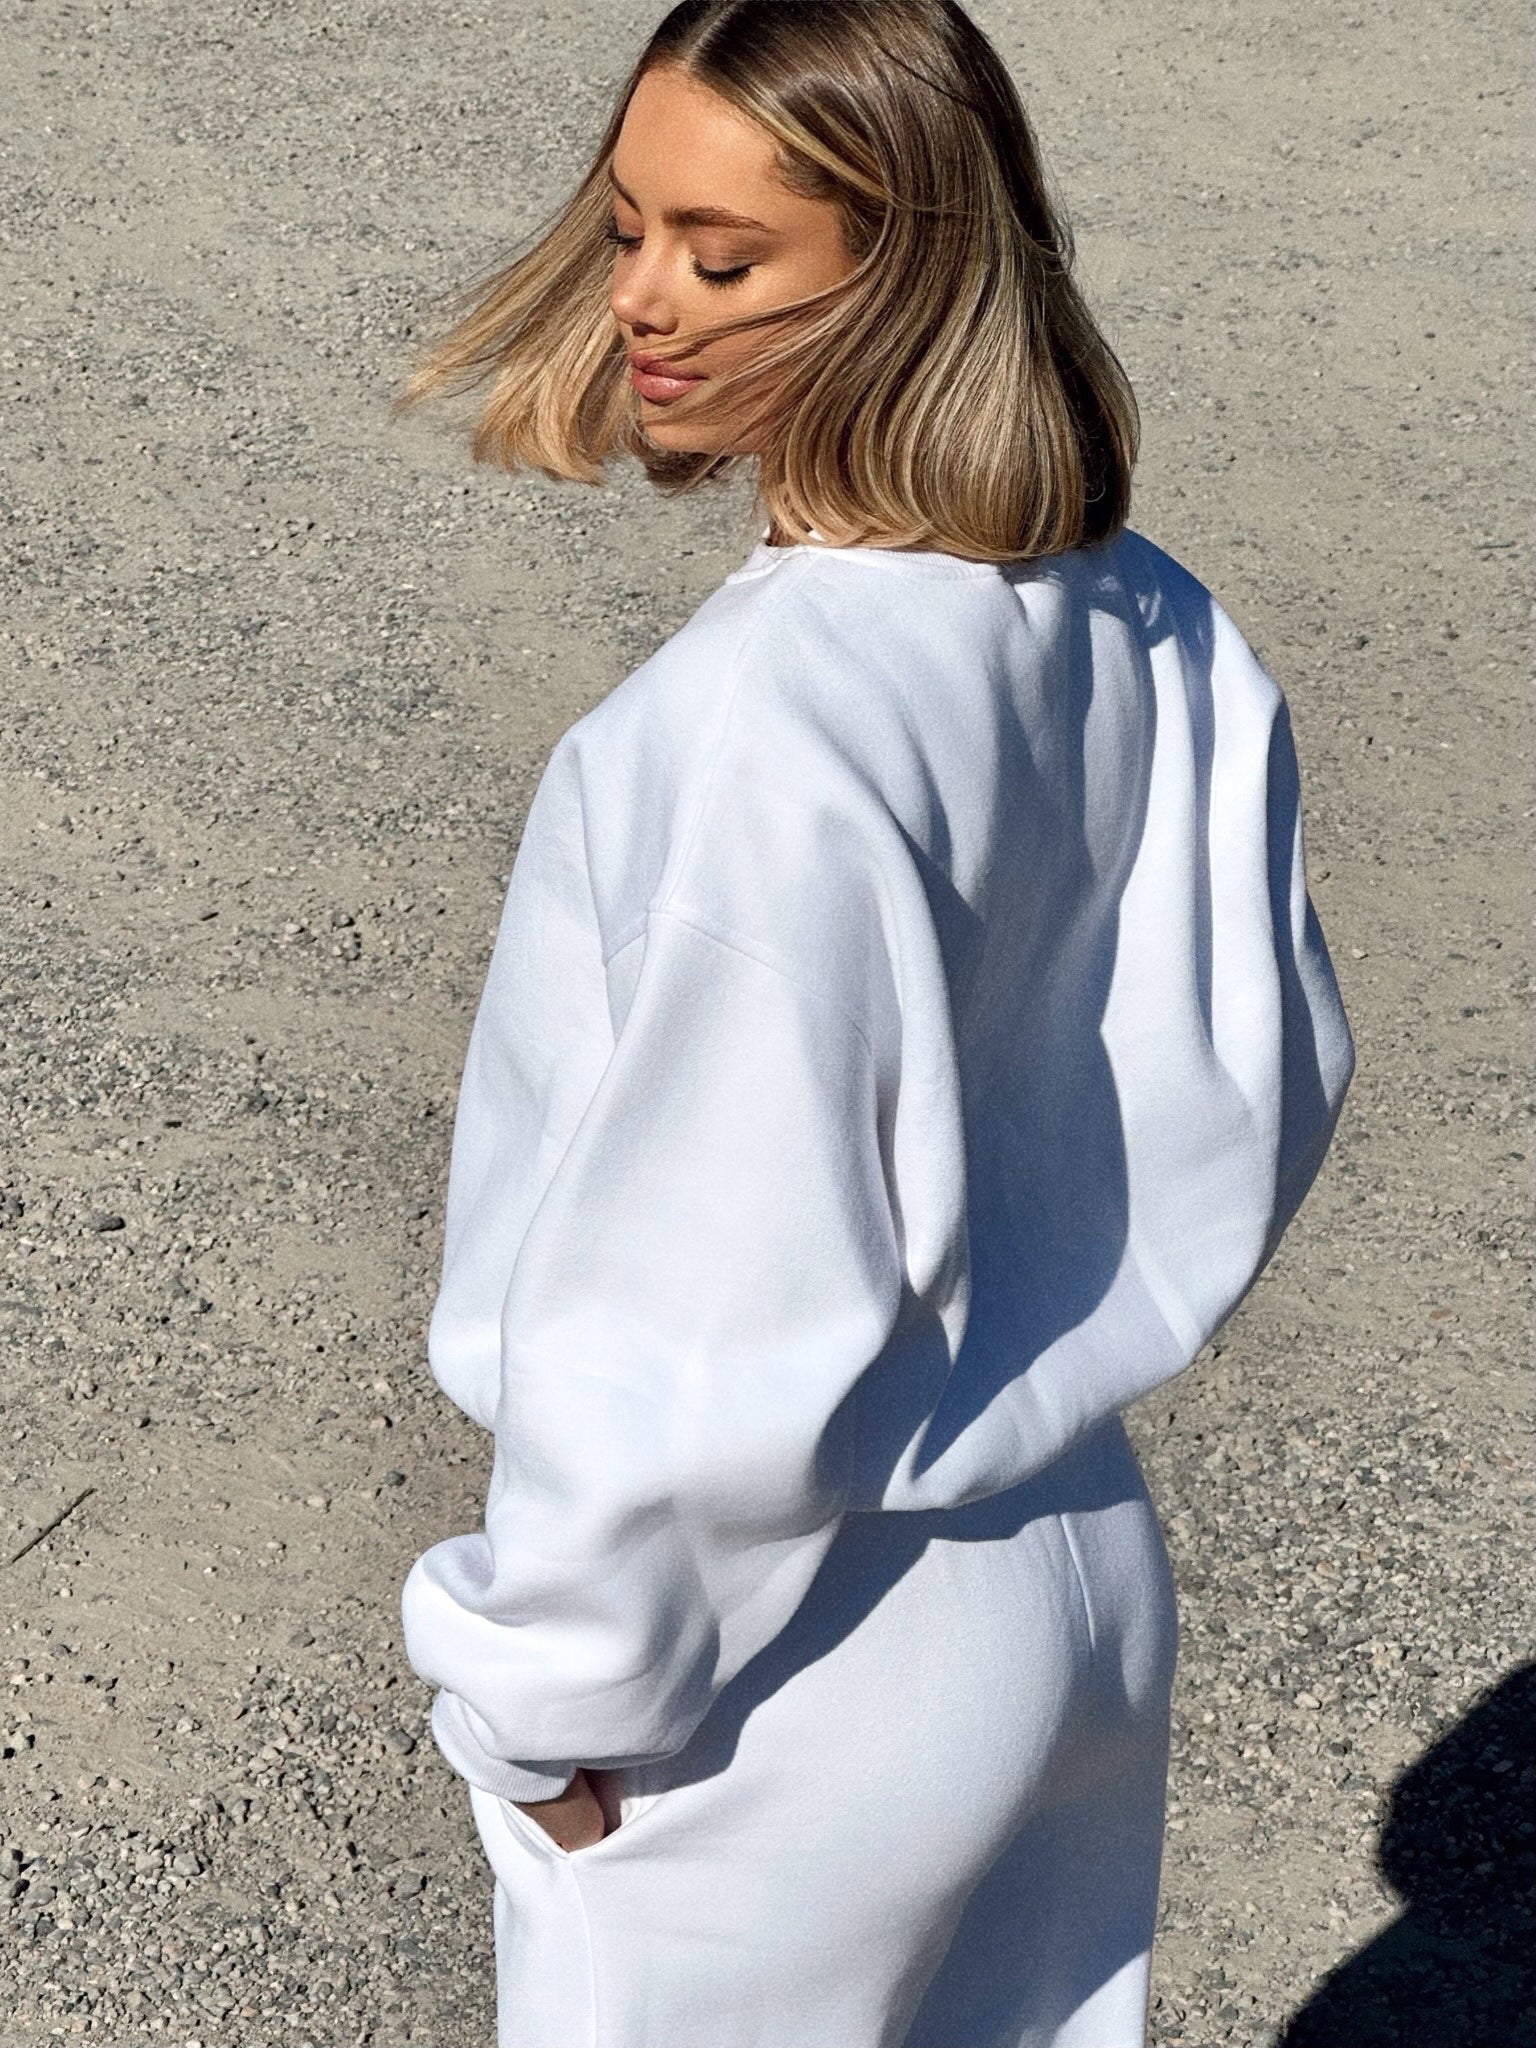 white jumper tracksuit | Kate galliano activewear